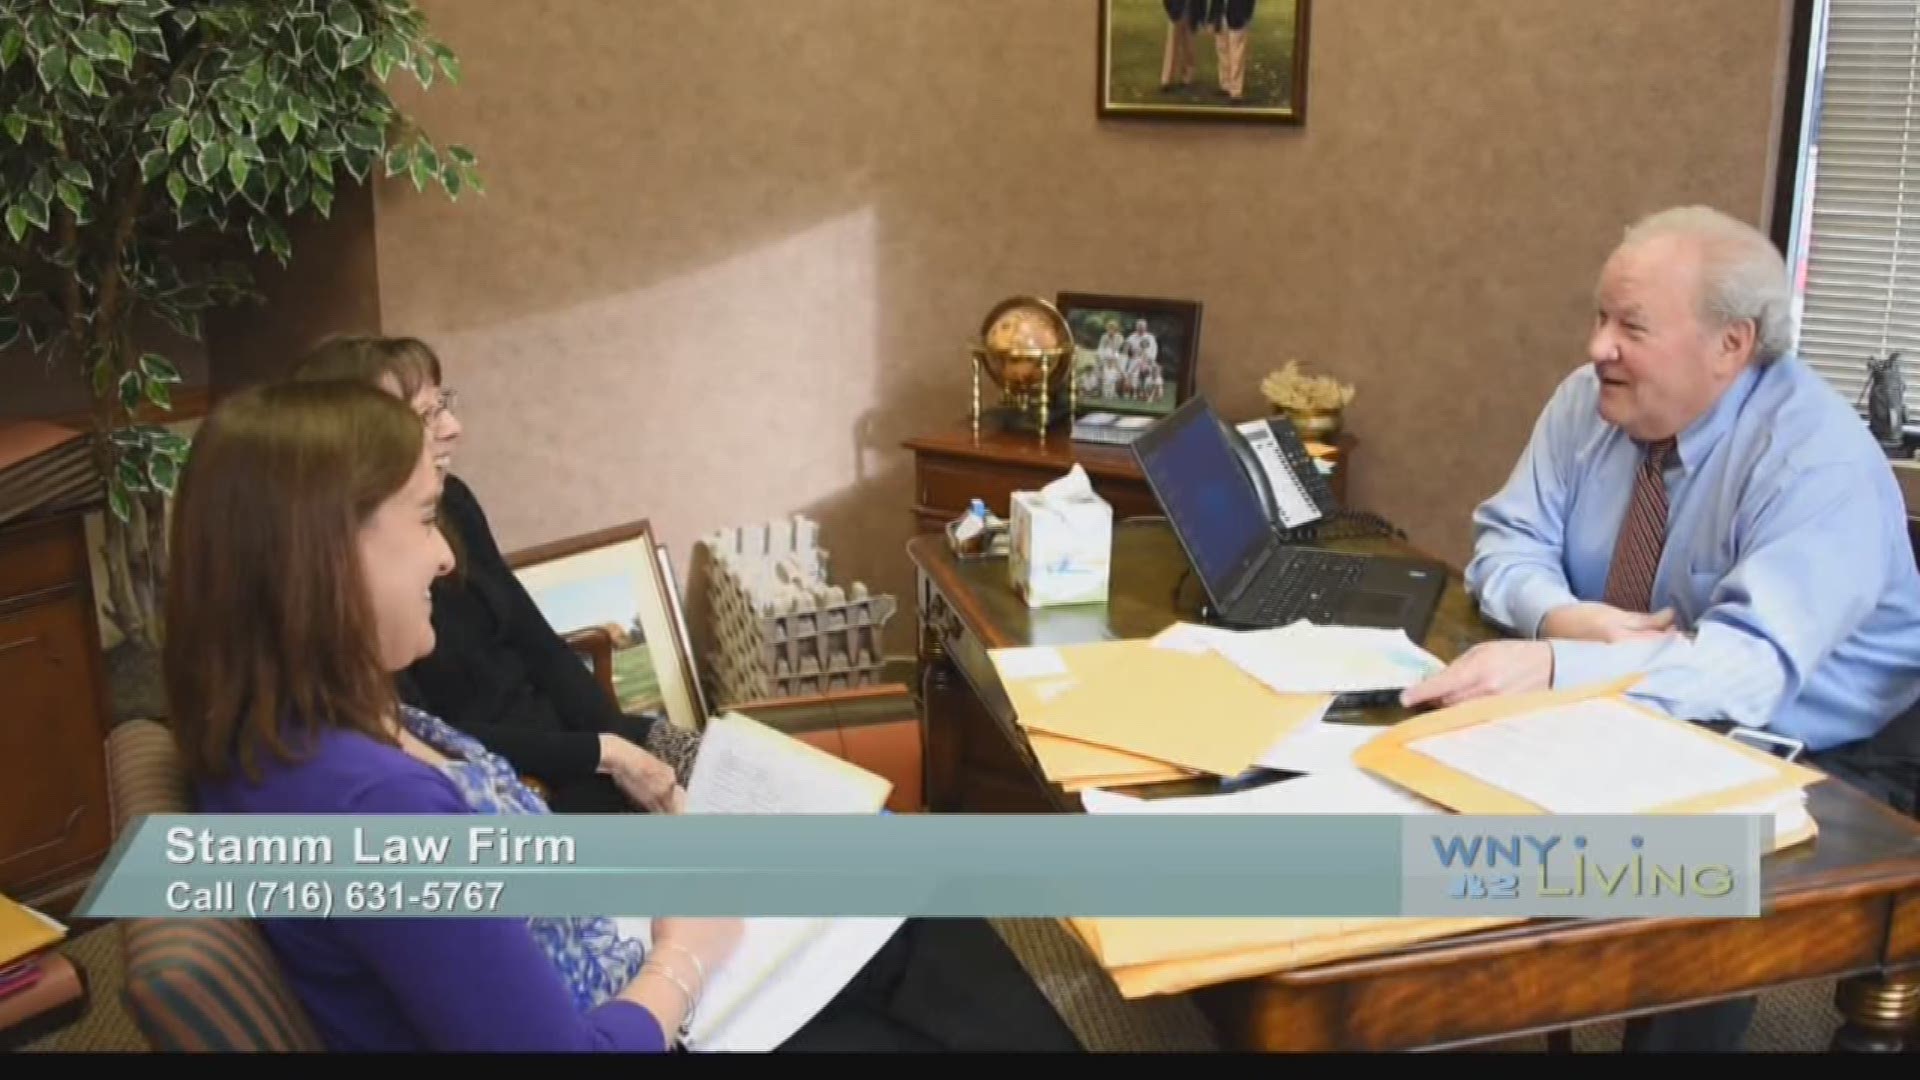 WNY Living - May 7 - Stamm Law Firm